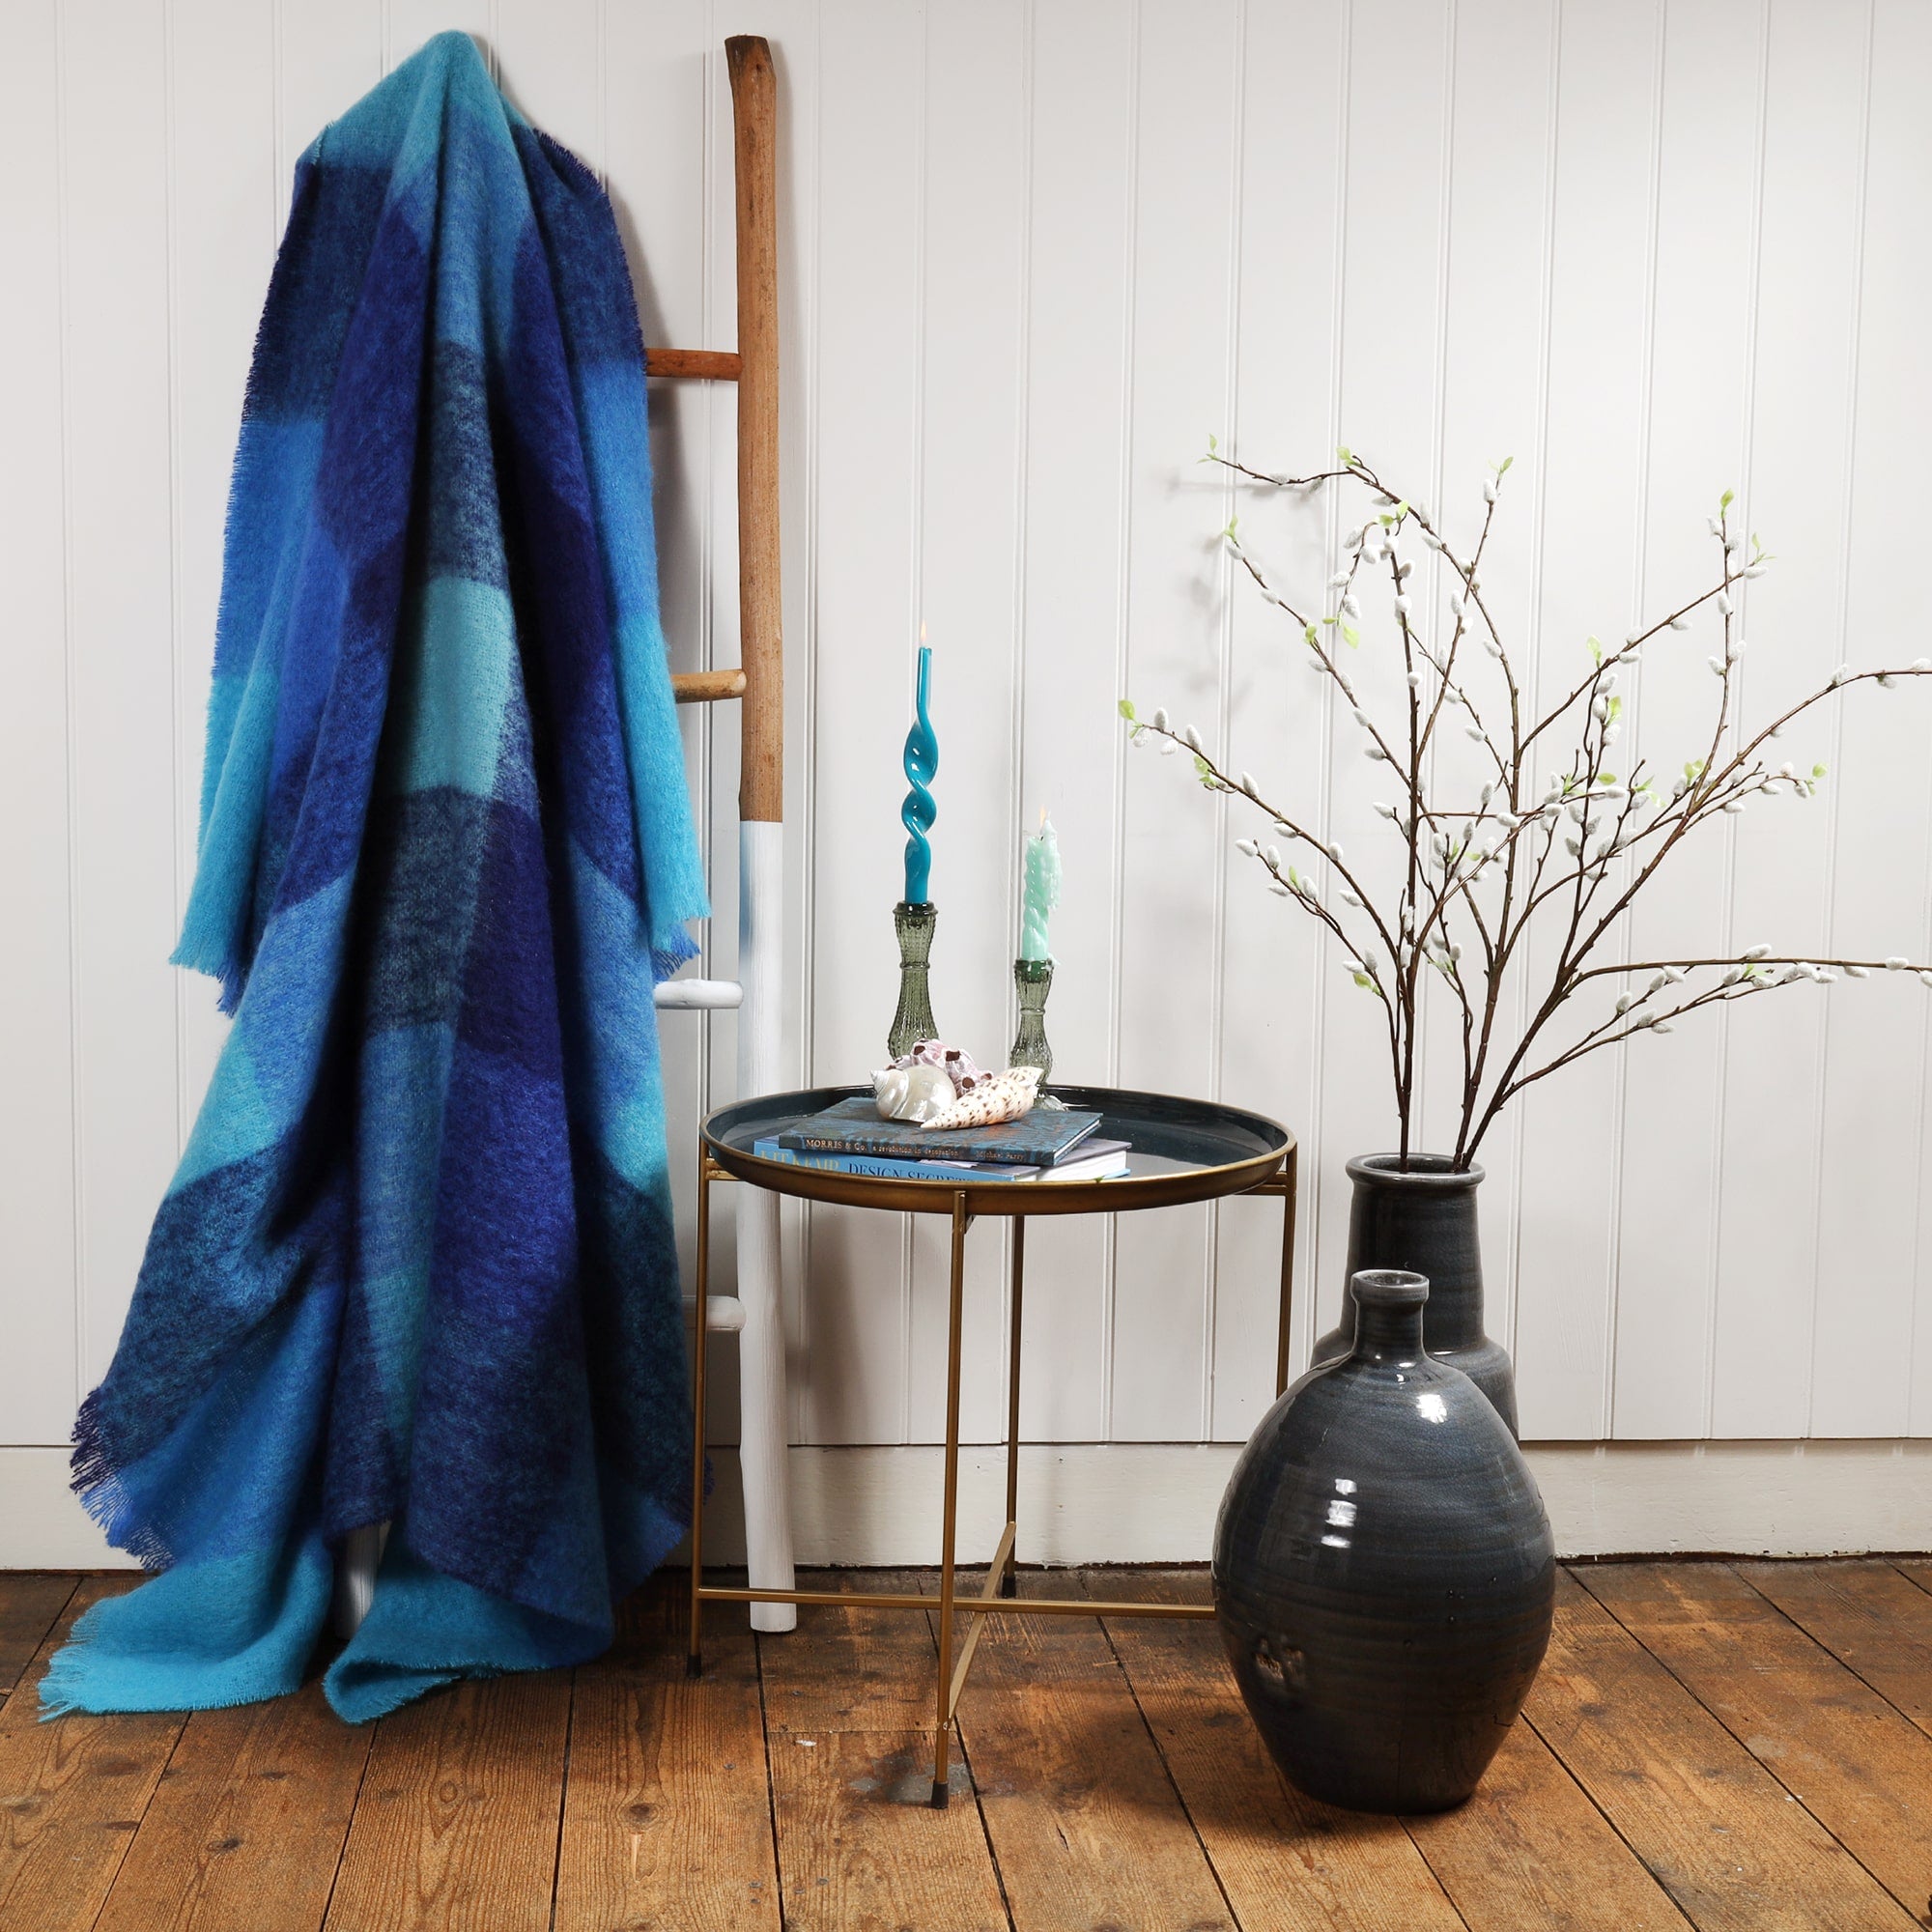 Mohair Throw in Aqua Blue check throw draped over a ladder against a wall.Next to the ladder is a table with books and a beachcomber Teapot and candles and candle holders.Next to the table are large navy vases with catkins coming out of them